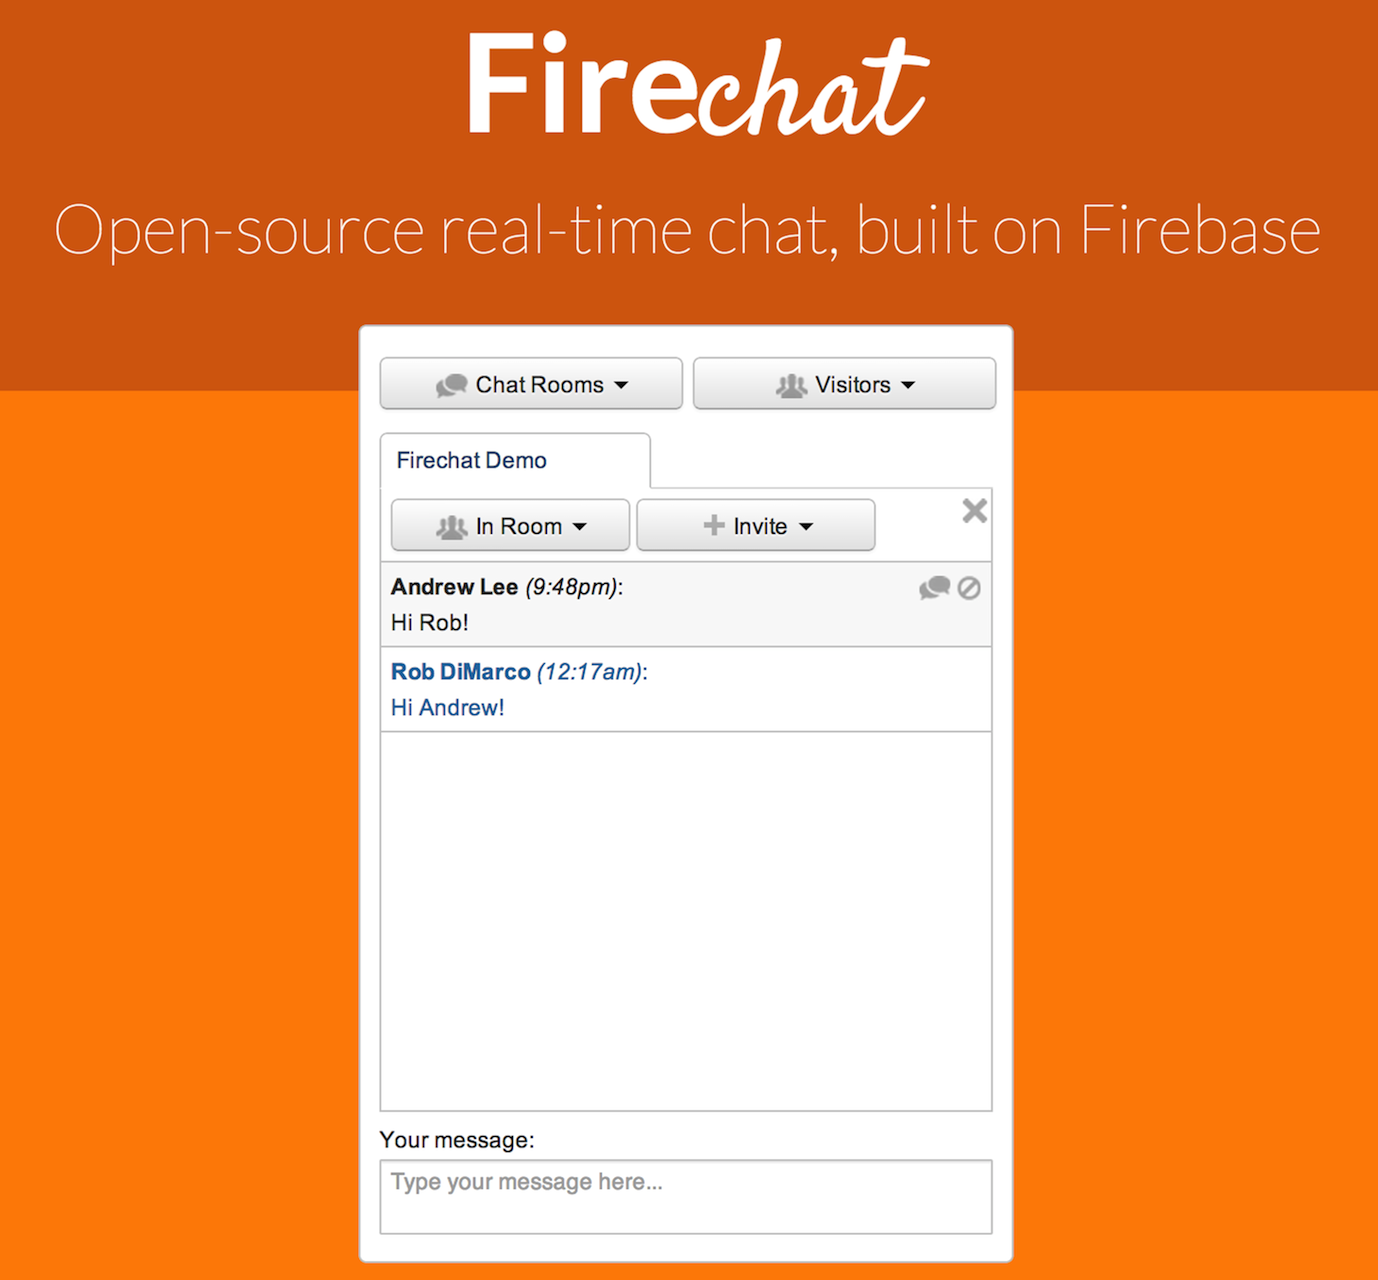 Firebase Adds Support for Java and Android, Launches Firechat Open Source Chat